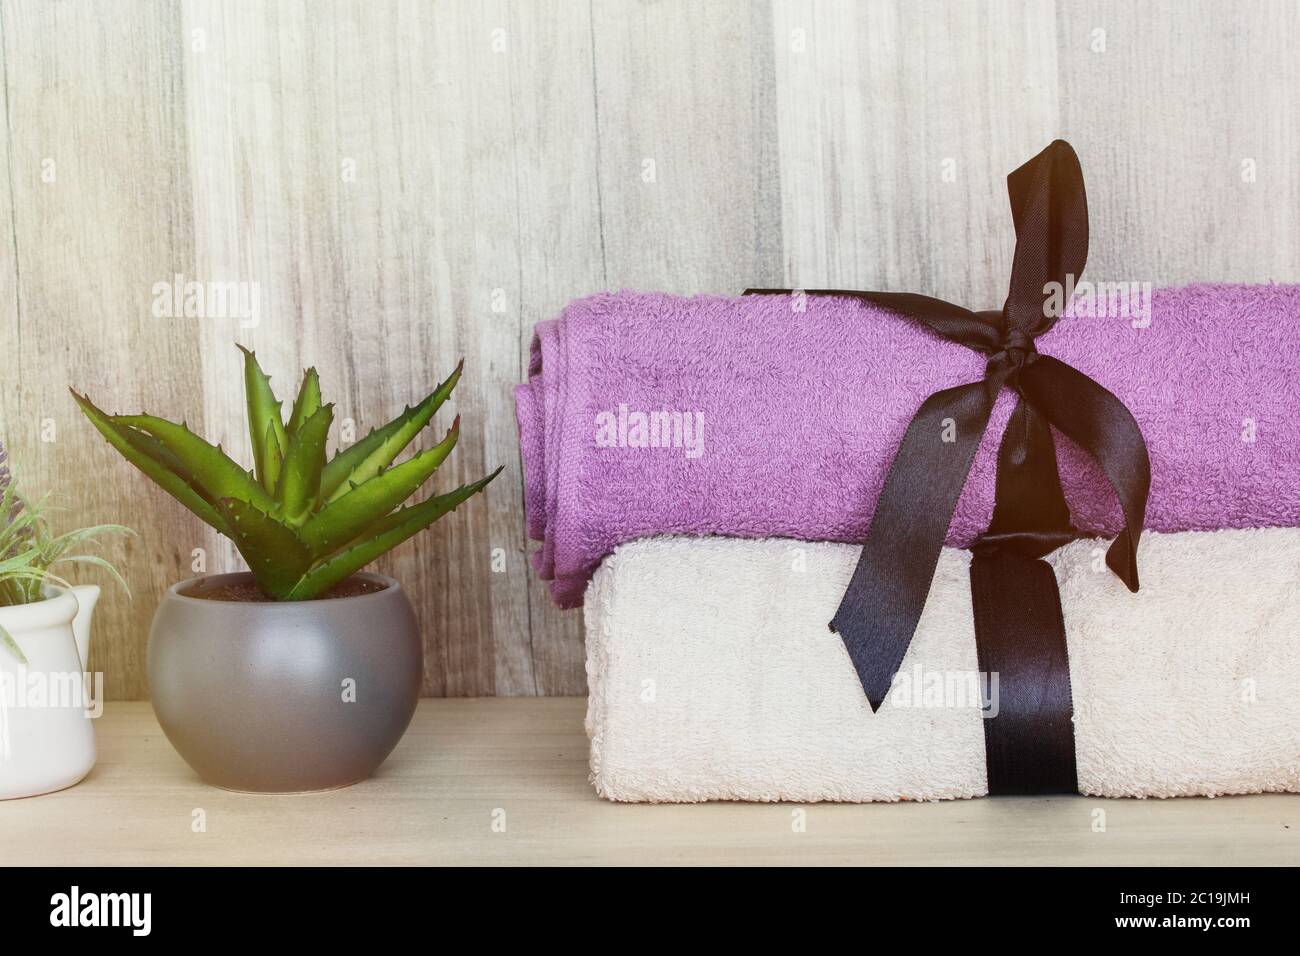 Towels with a decorative plant. Beauty Spa Health and Wellness concept. Stock Photo